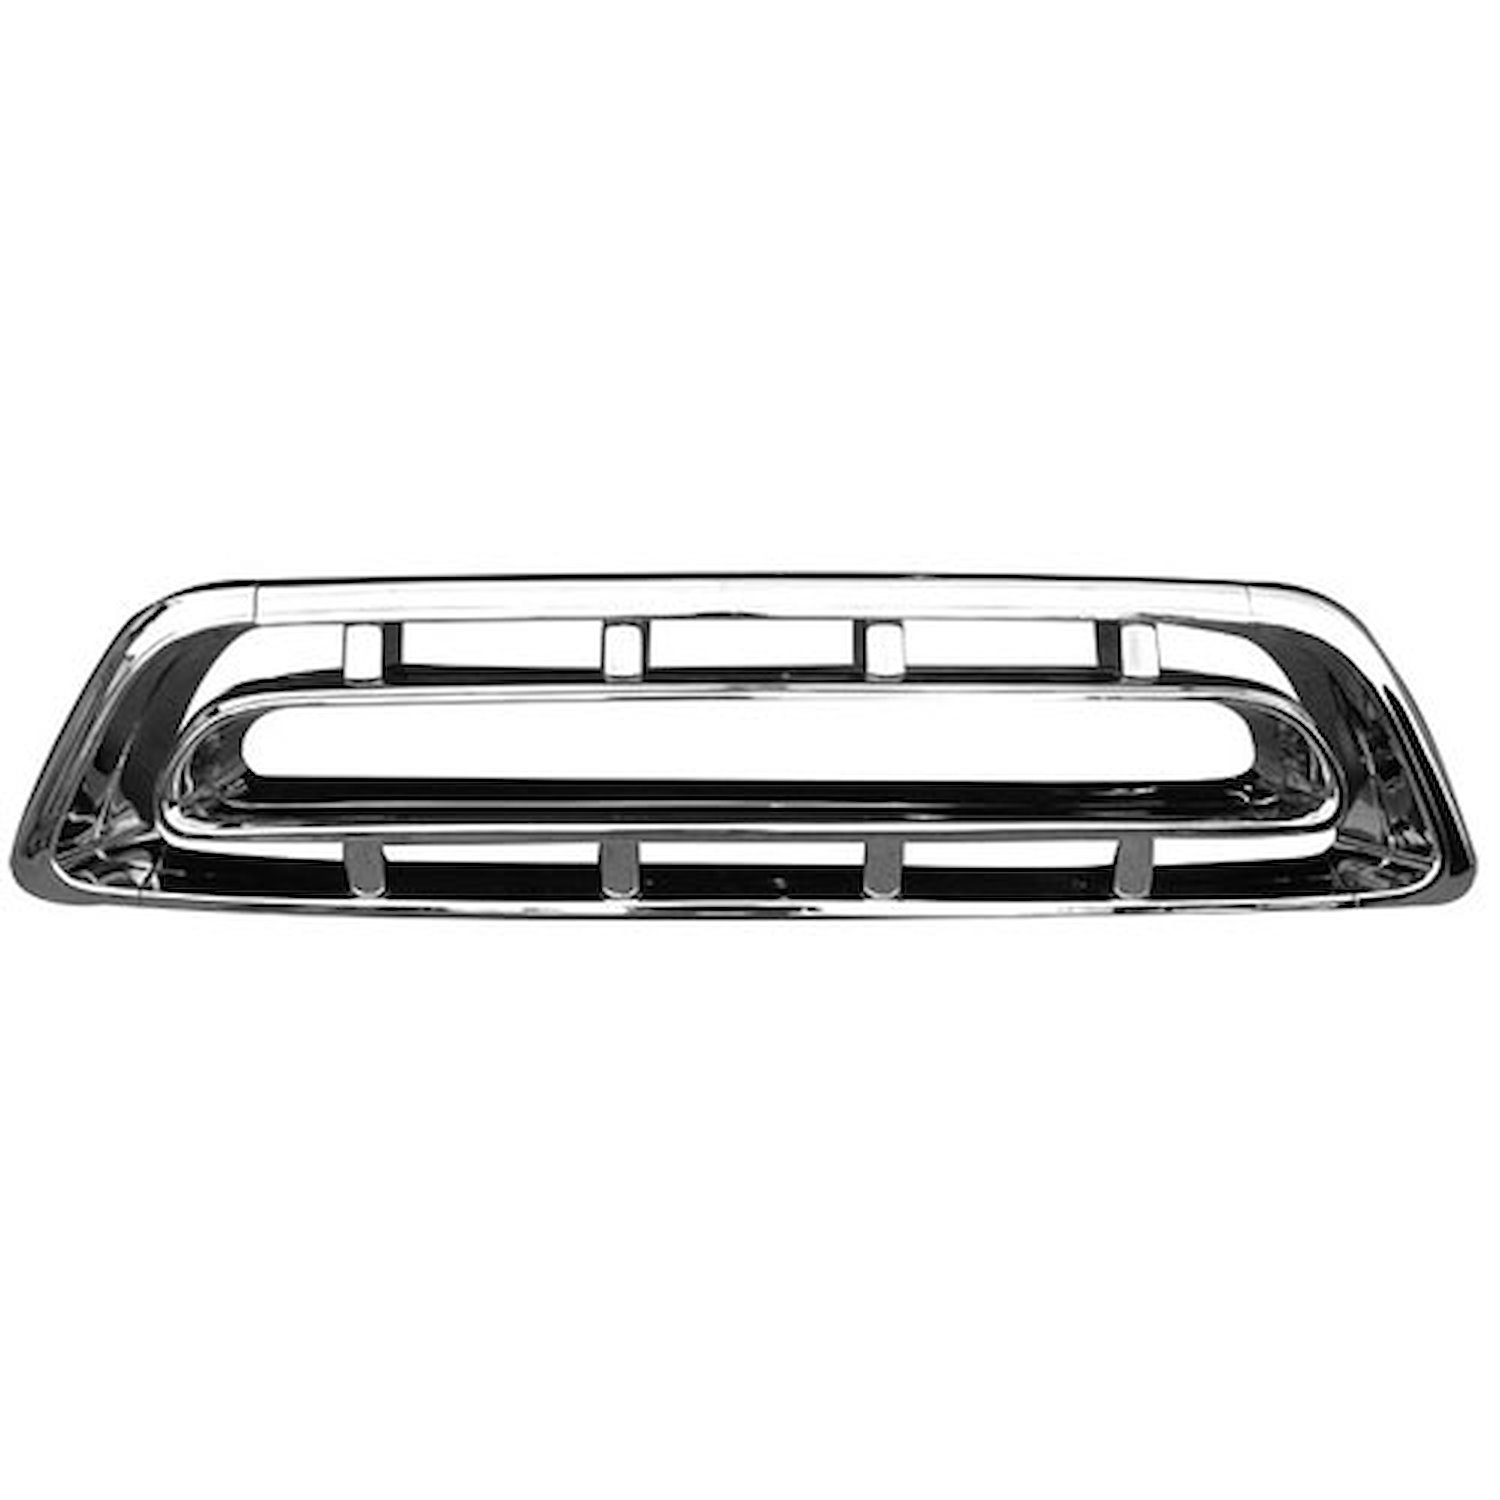 OE Reproduction Grille 1957 Chevrolet Pickup